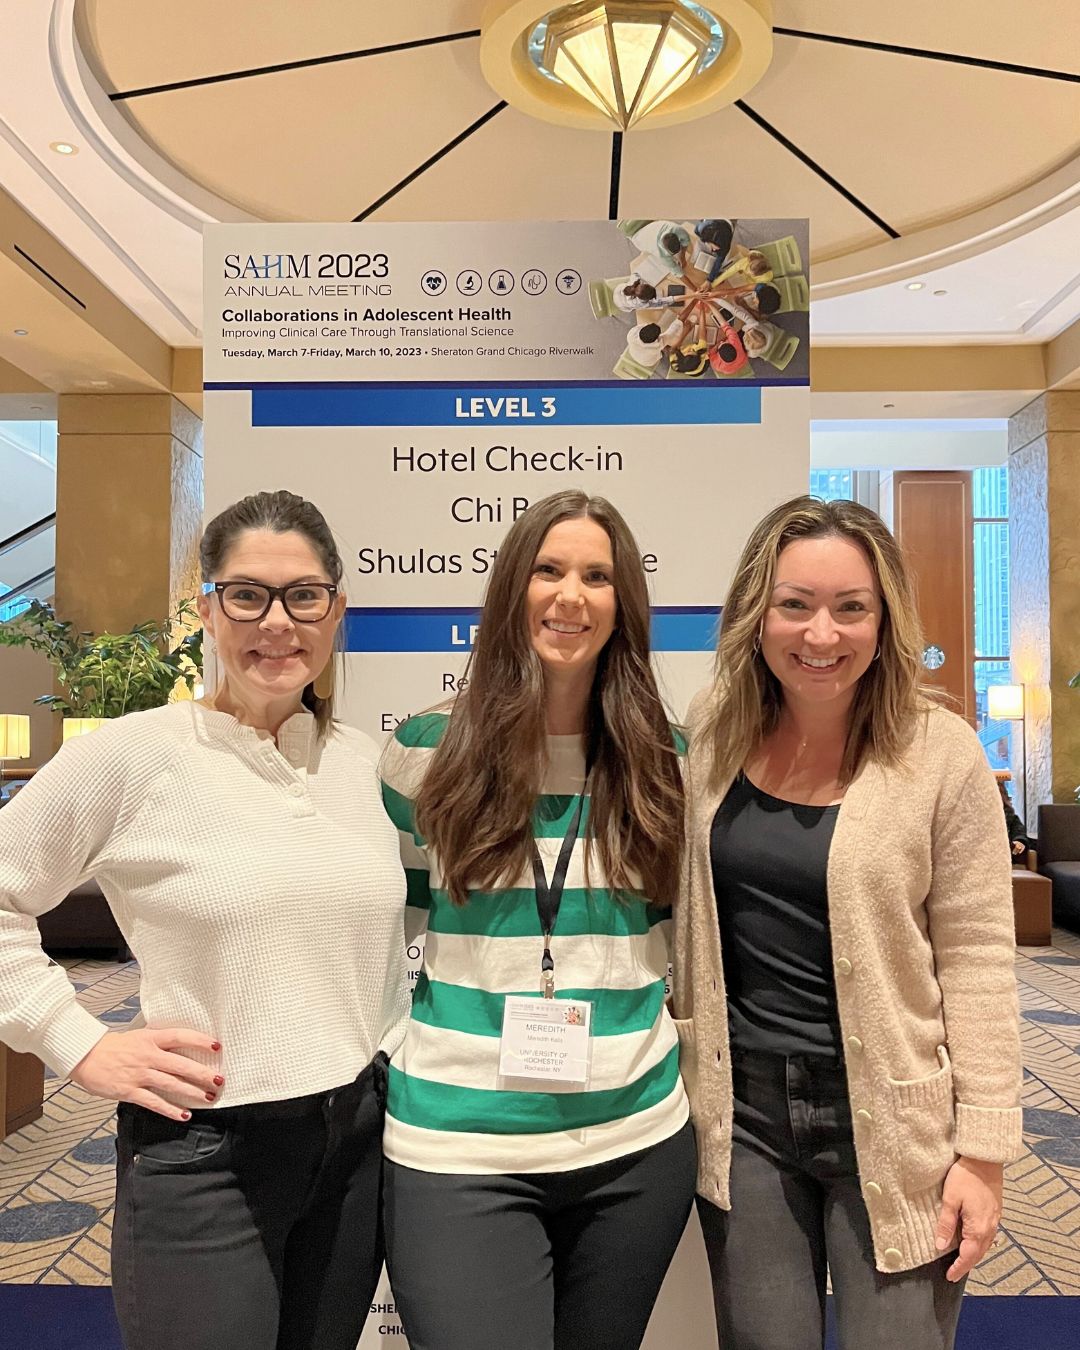 Amy Realbuto, Meredith Kells, and Heather Wensley pose for a photo together at the 2024 Society for Adolescent Health and Medicine conference.